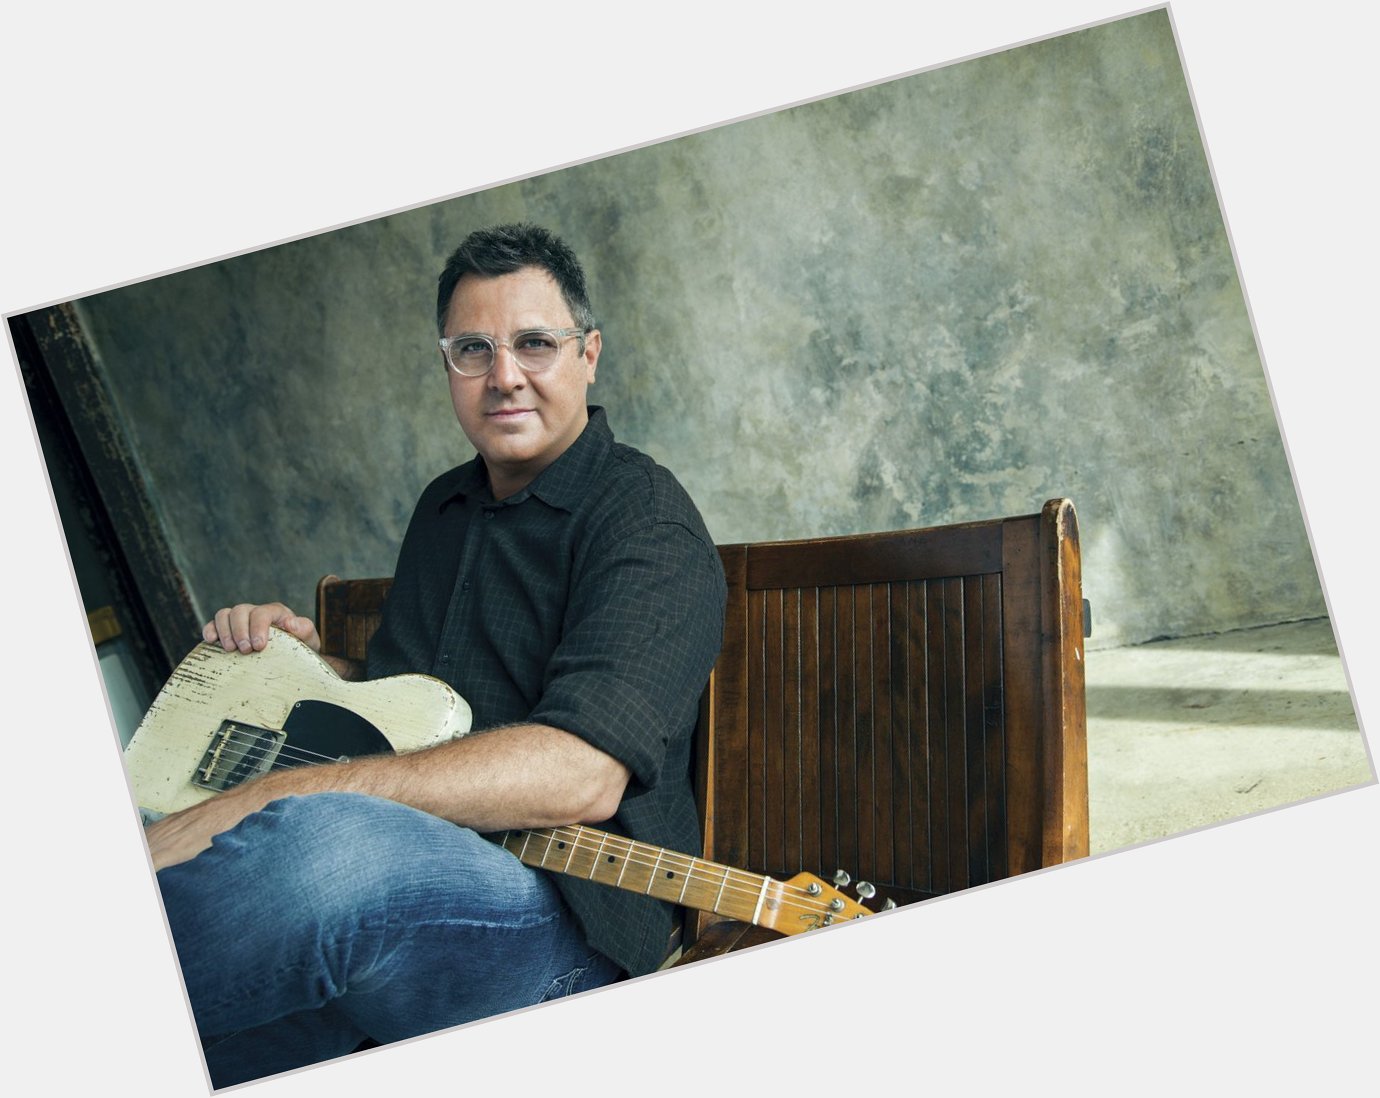 Remessage to join us in wishing Vince Gill a very happy birthday! 